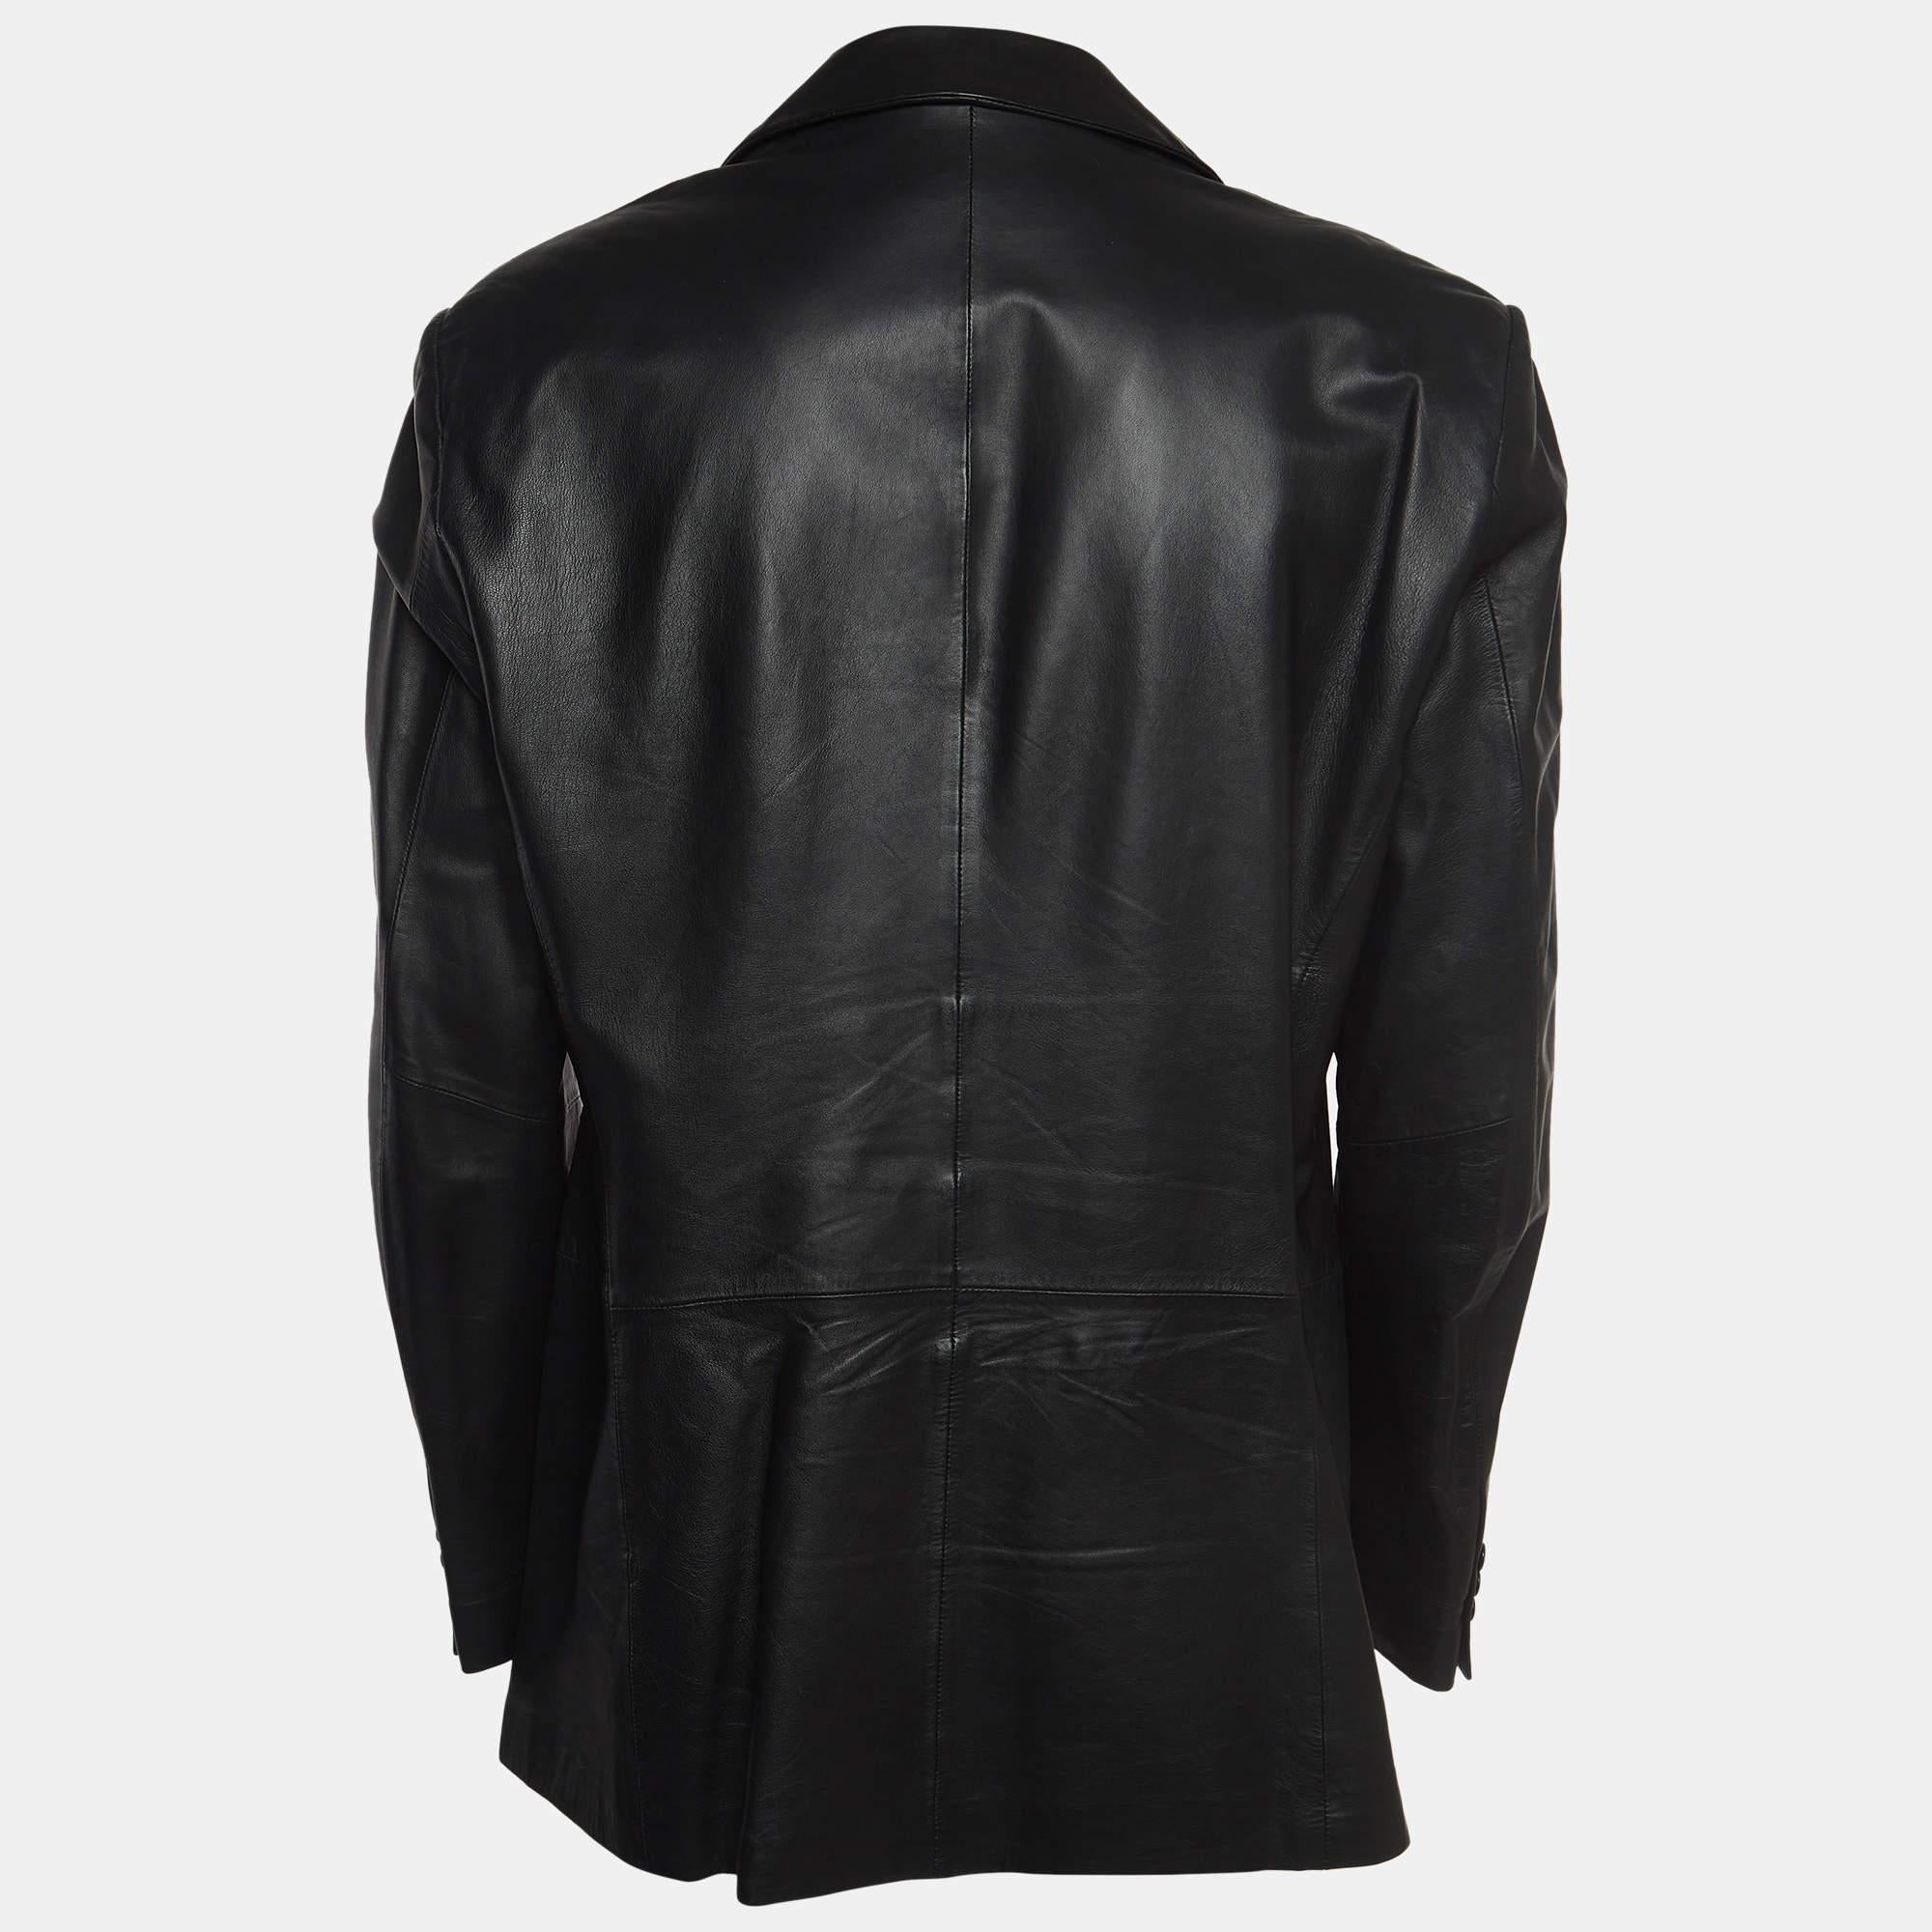 The Emporio Armani coat exudes timeless elegance. Crafted from luxurious black leather, its single-breasted design and button detailing epitomize sophistication. With a perfect blend of style and comfort, this coat effortlessly elevates any